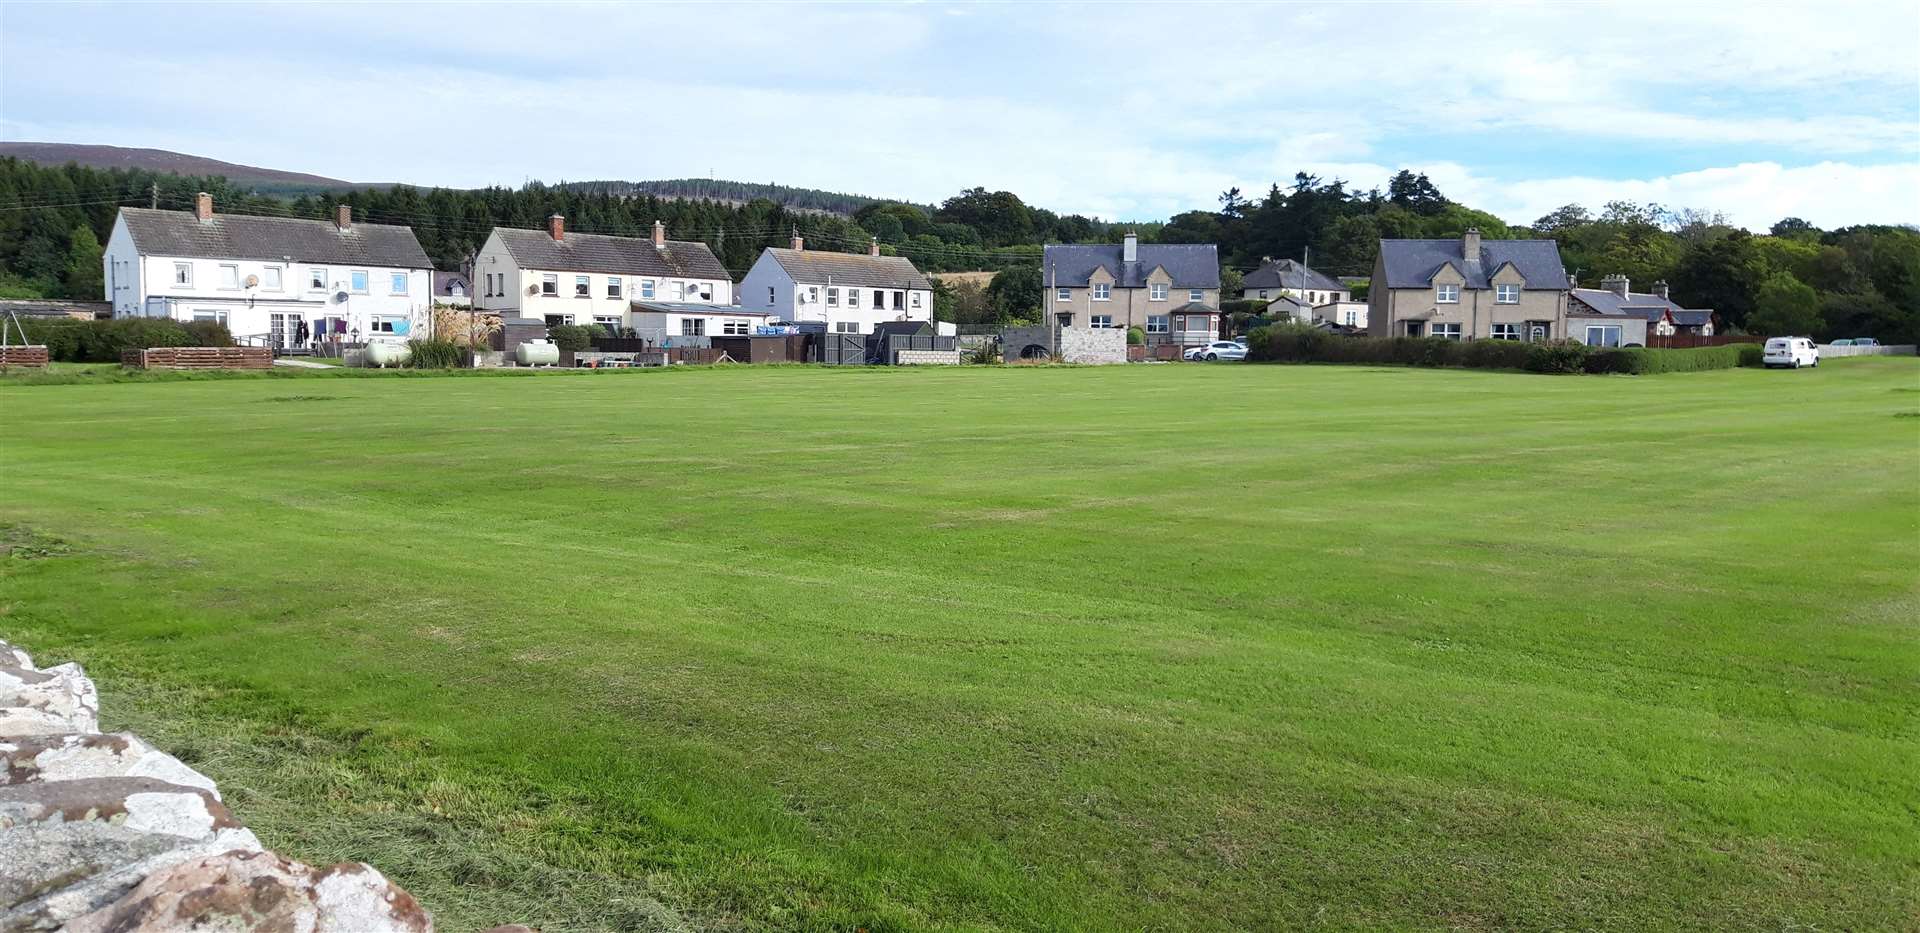 The 'old hockey pitch' at Golspie is the proposed site for the new builds.